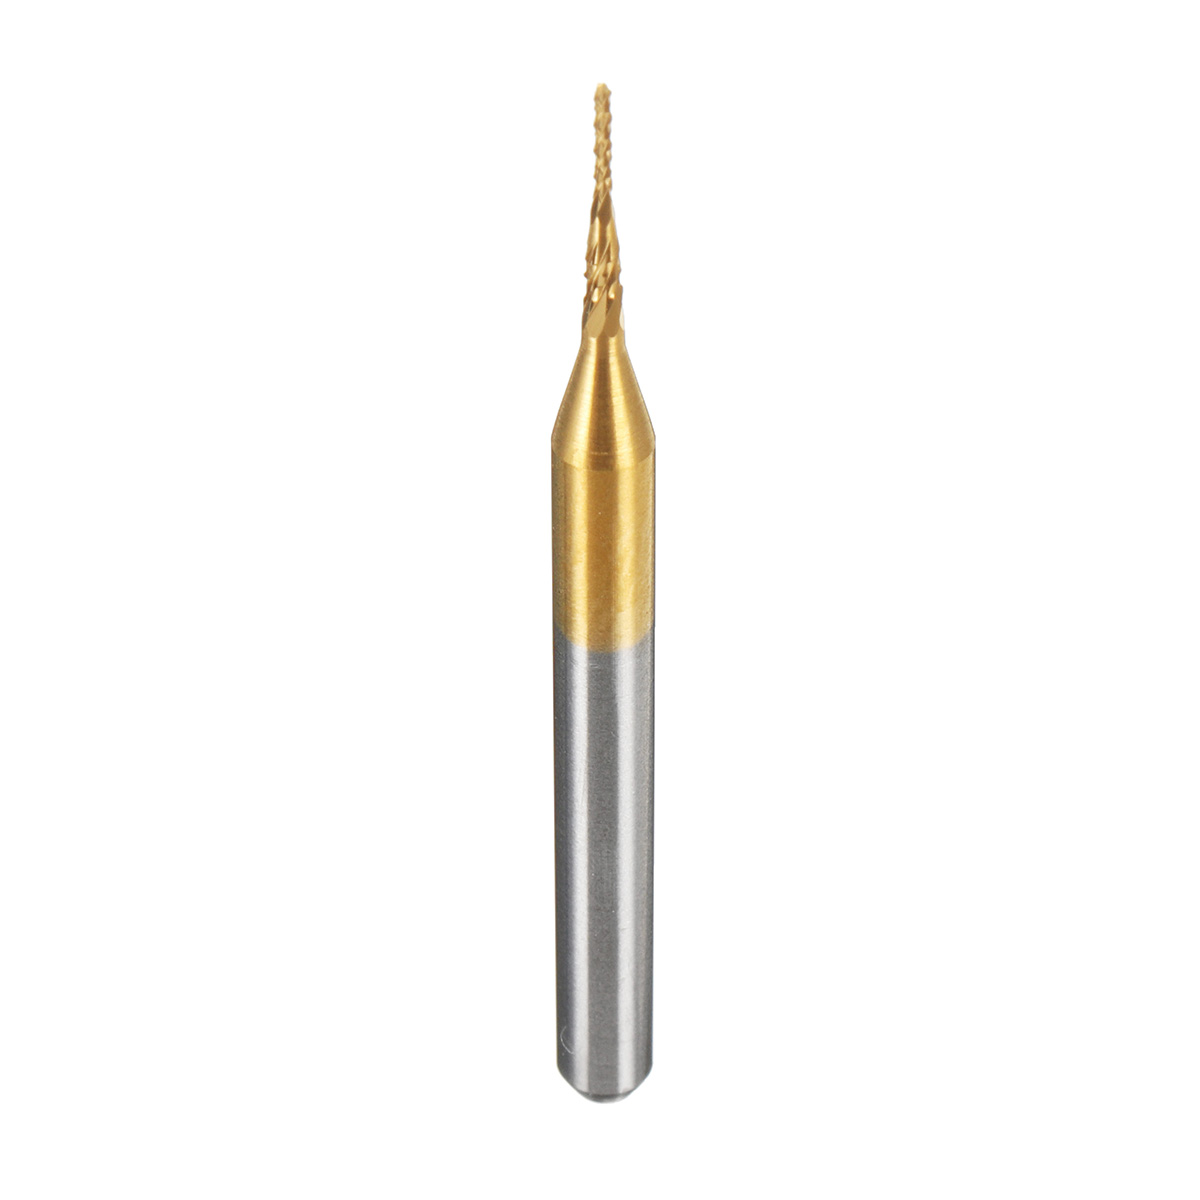 Drillpro-10pcs-08mm-Titanium-Coated-Engraving-Milling-Cutter-Carbide-End-Mill-Rotary-Burr-1531799-6